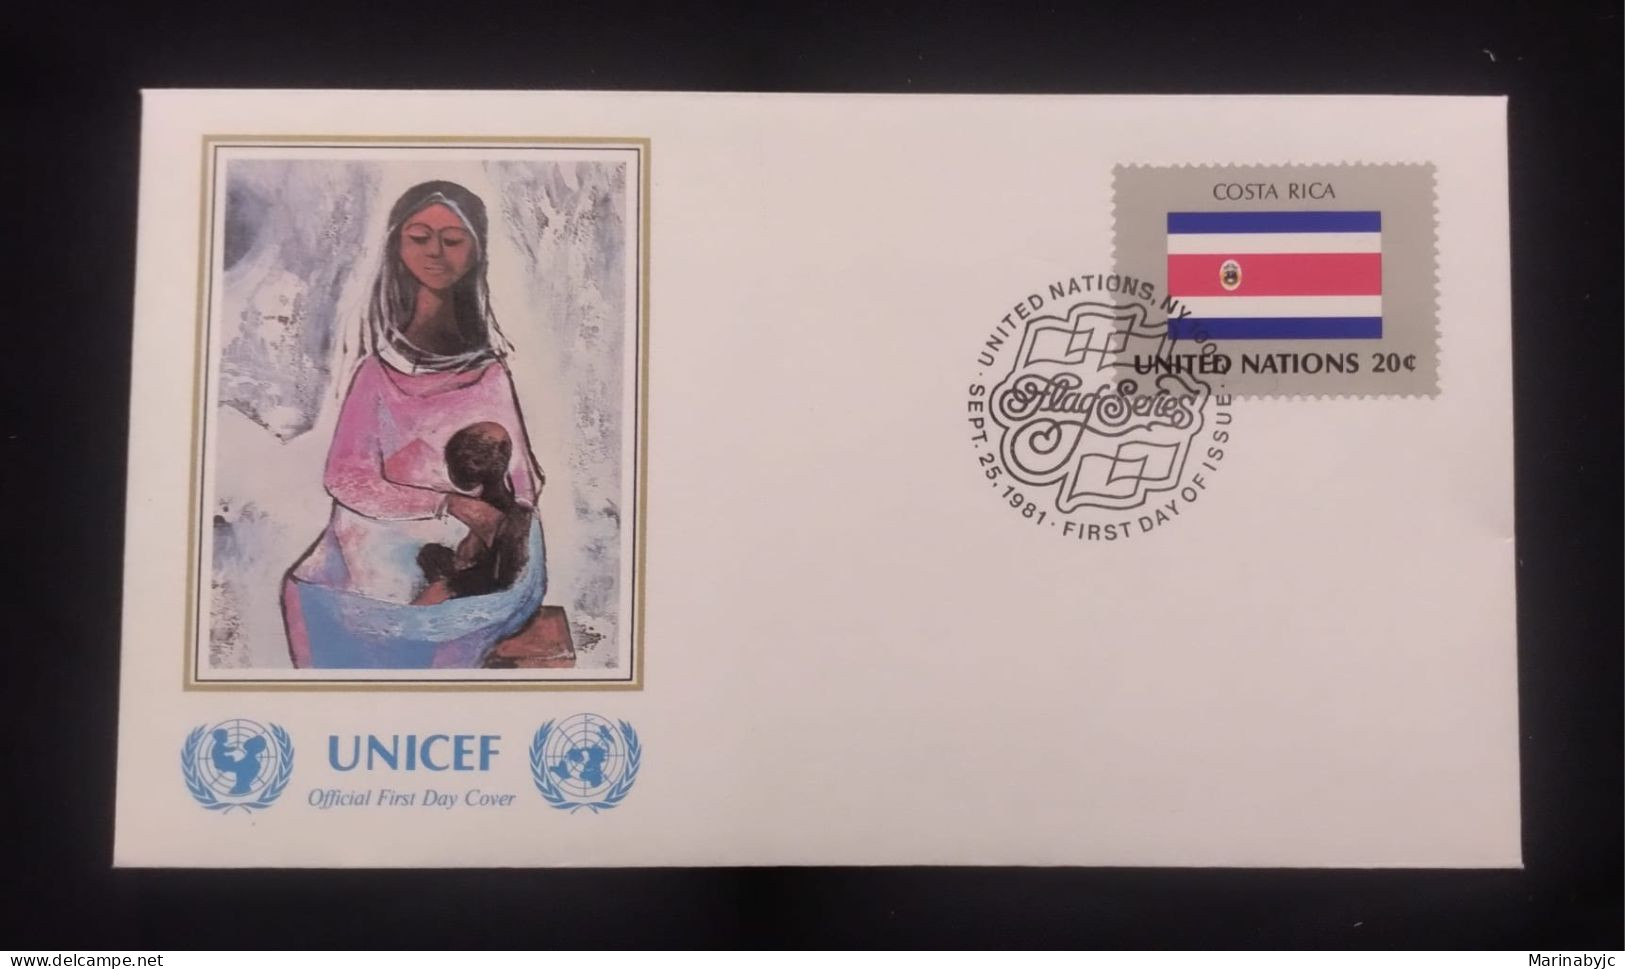 EL)1980 UNITED NATIONS, NATIONAL FLAG OF THE MEMBER COUNTRIES, COSTA RICA, ART - MOTHER AND CHILD PAINTING, UNICEF, FDC - Unused Stamps